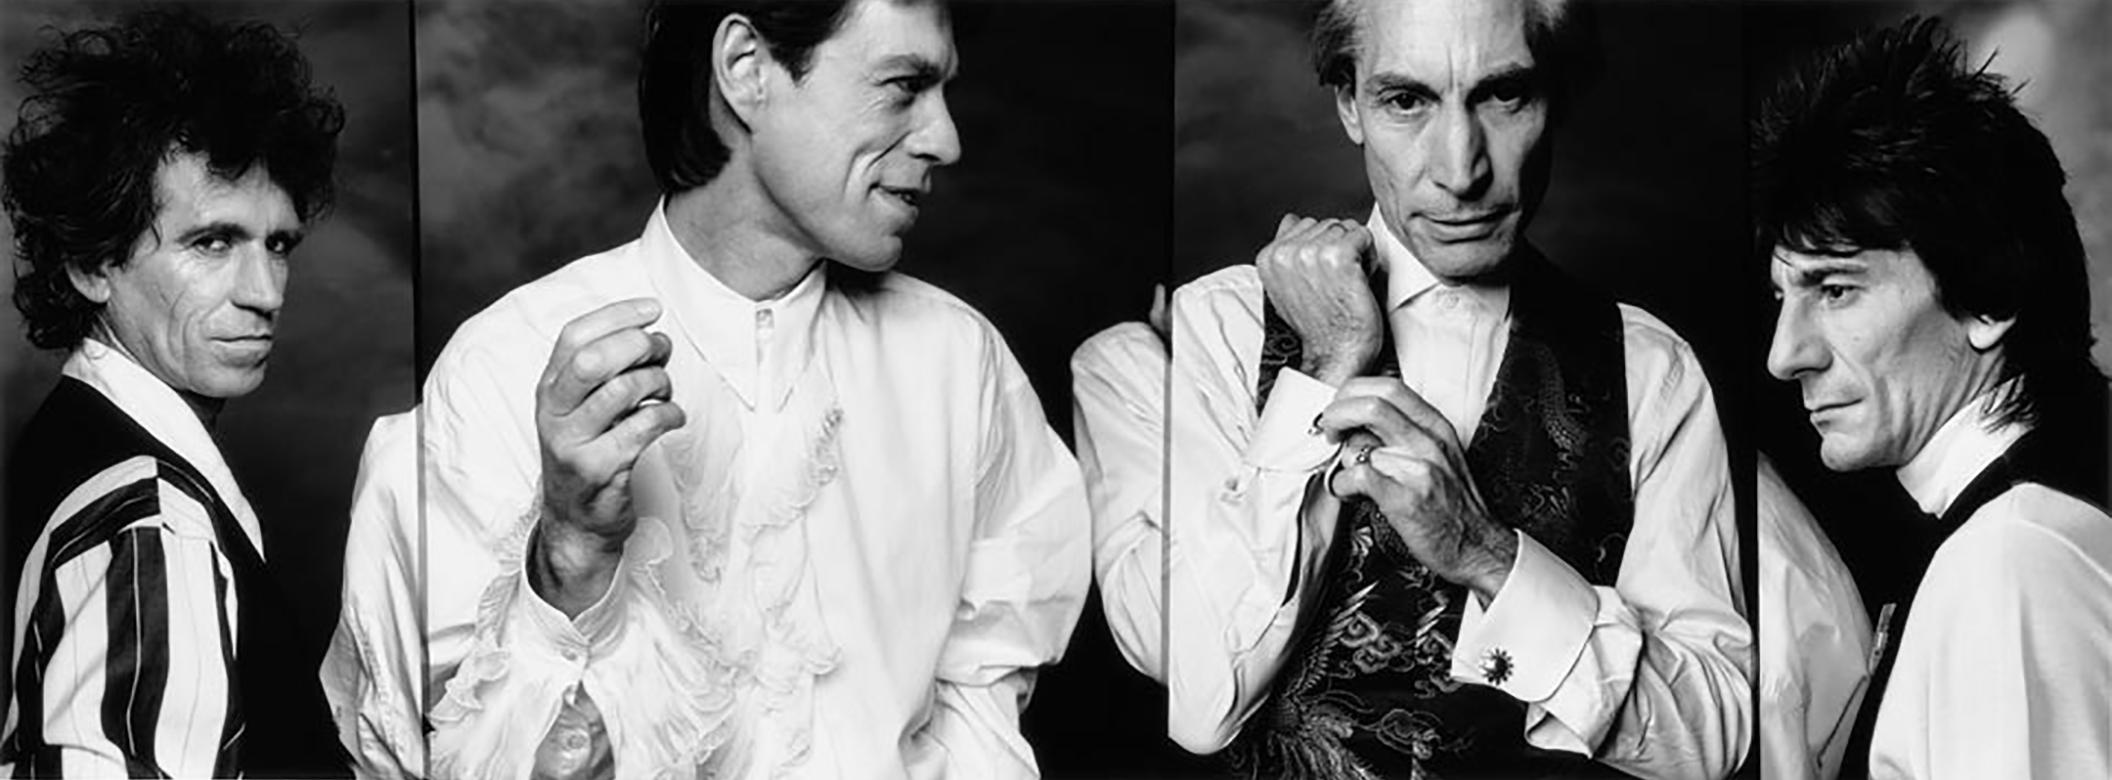 John Stoddart Black and White Photograph - The Rolling Stones (Limited Edition of 25) - Celebrity Photography